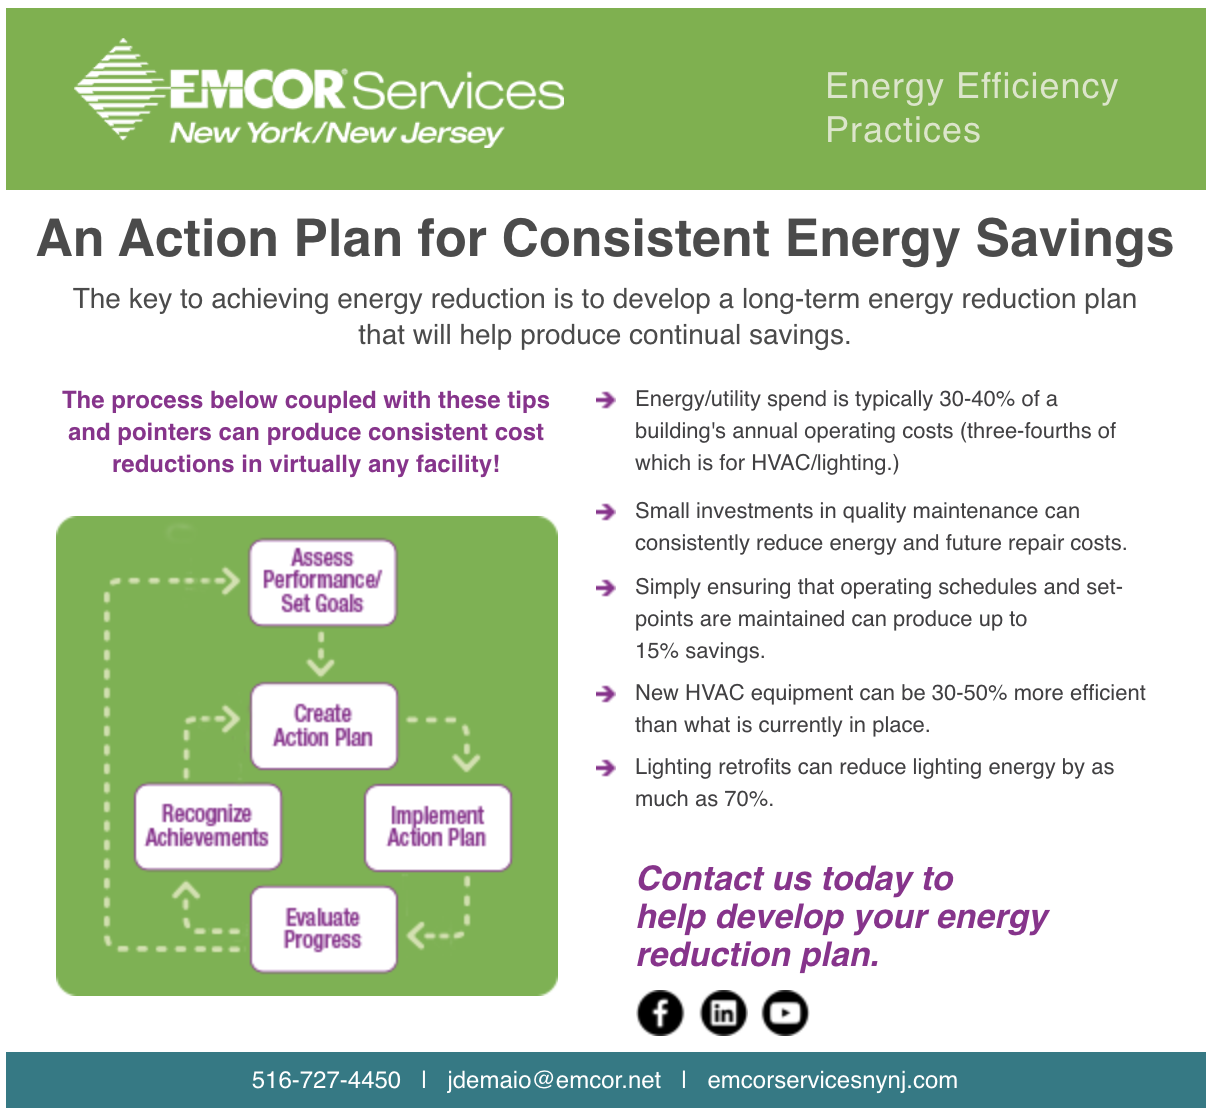 An Action Plan for Consistent Energy Savings